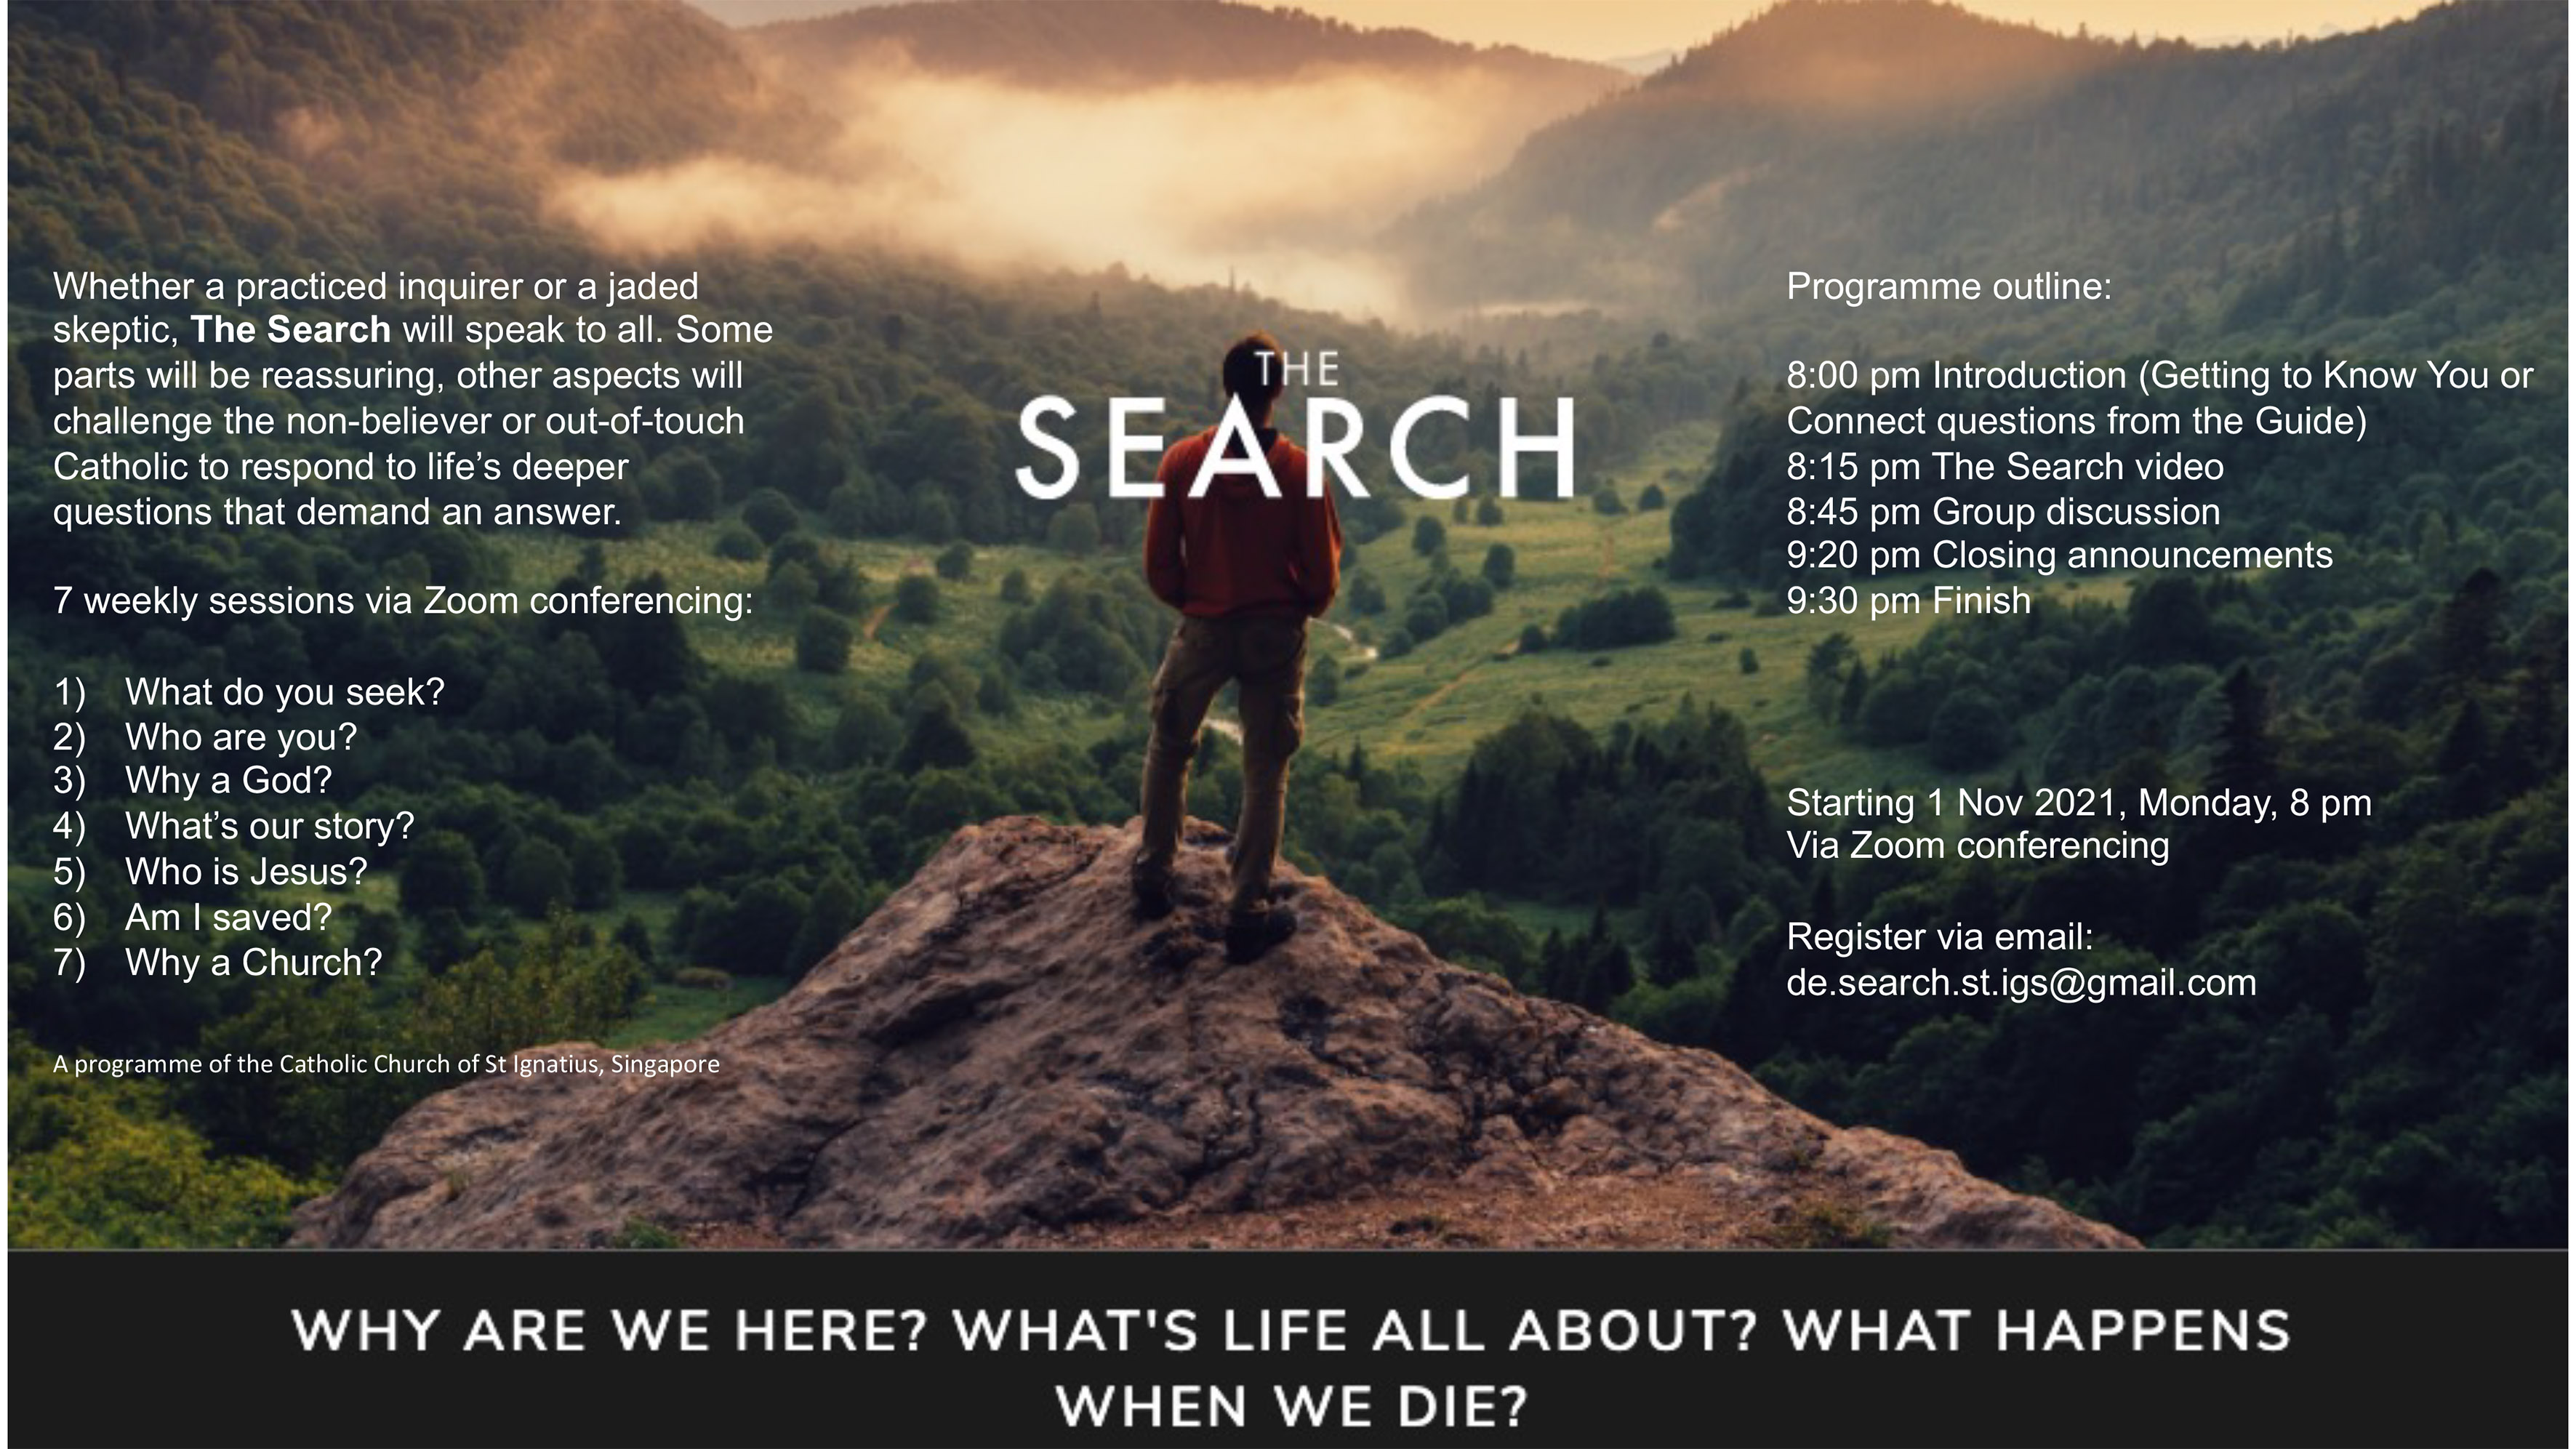 The Search flyer